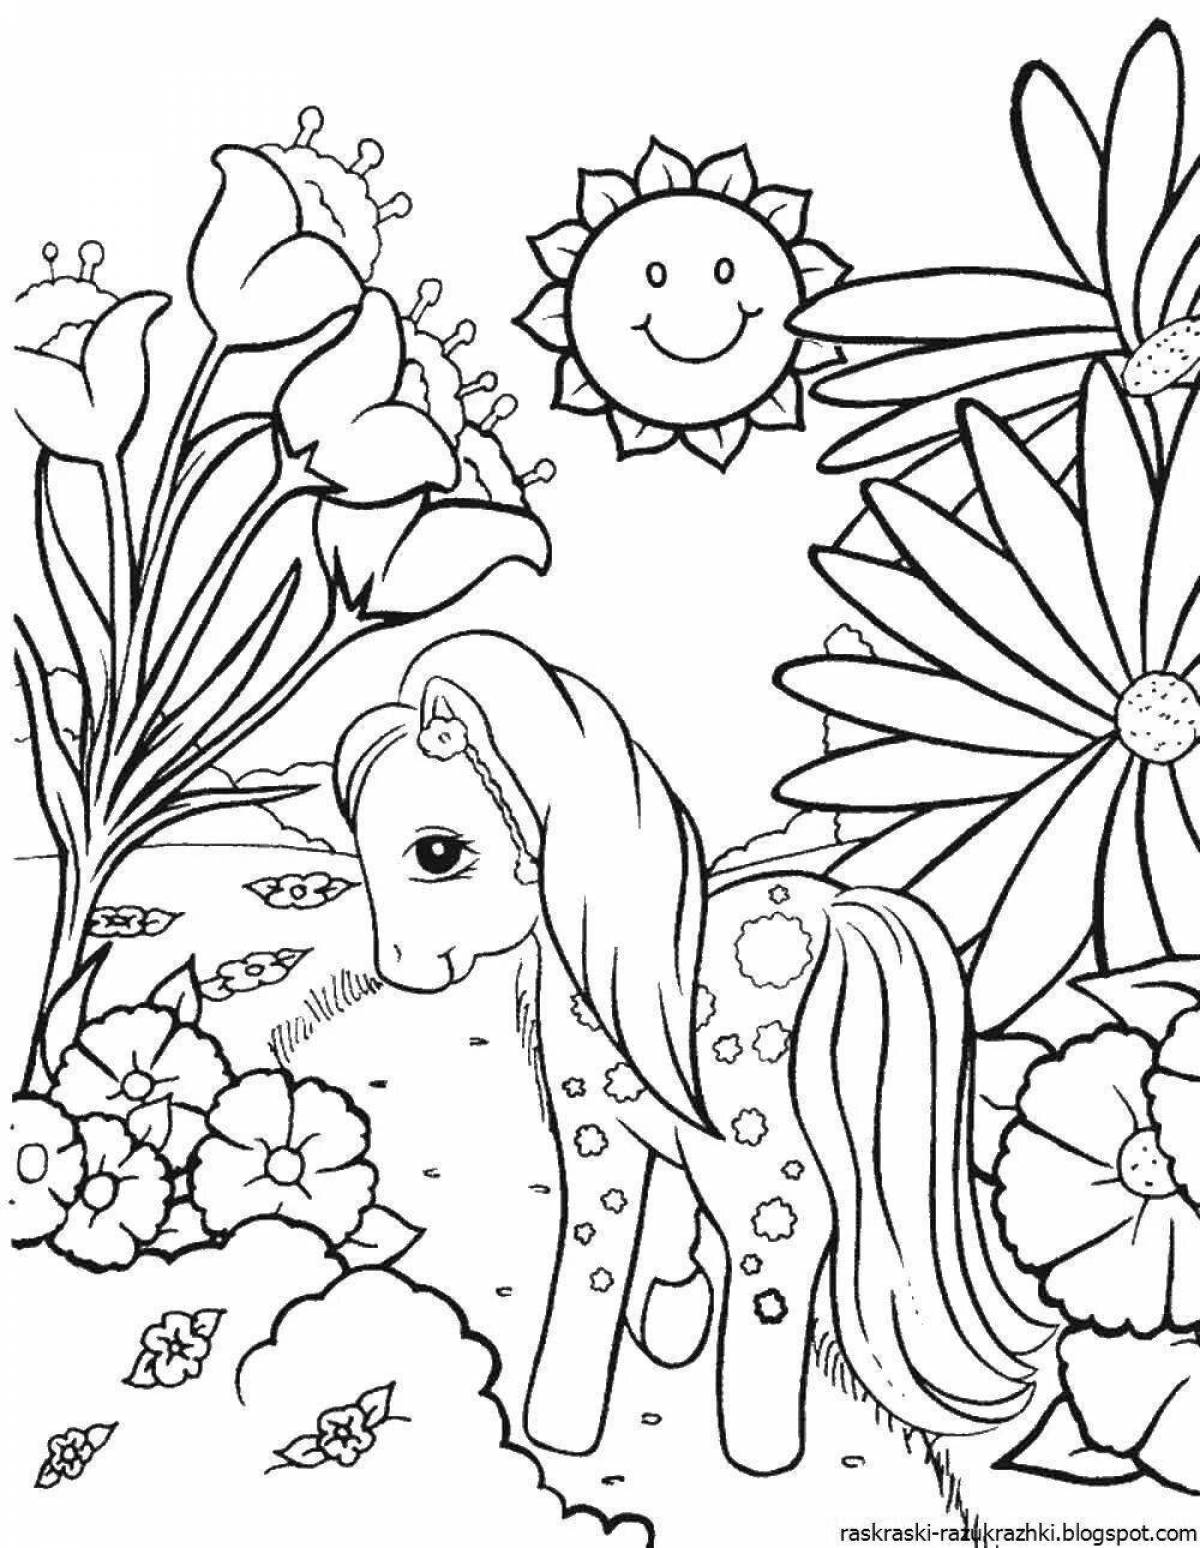 Playful coloring for girls 5 years old animals